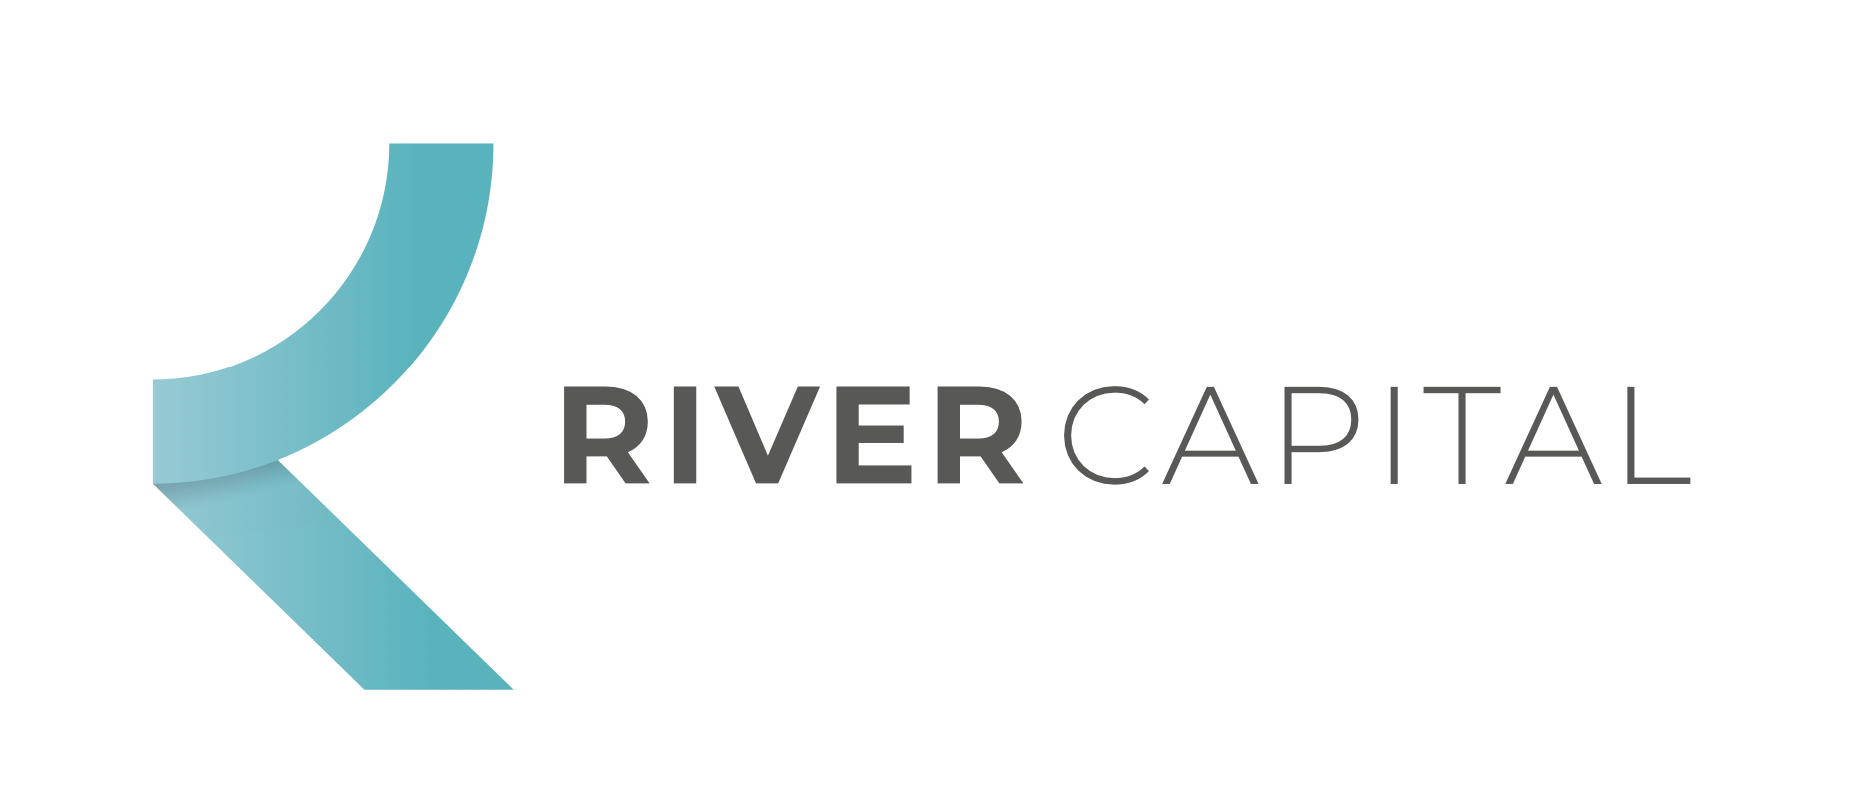 River Capital Black and White